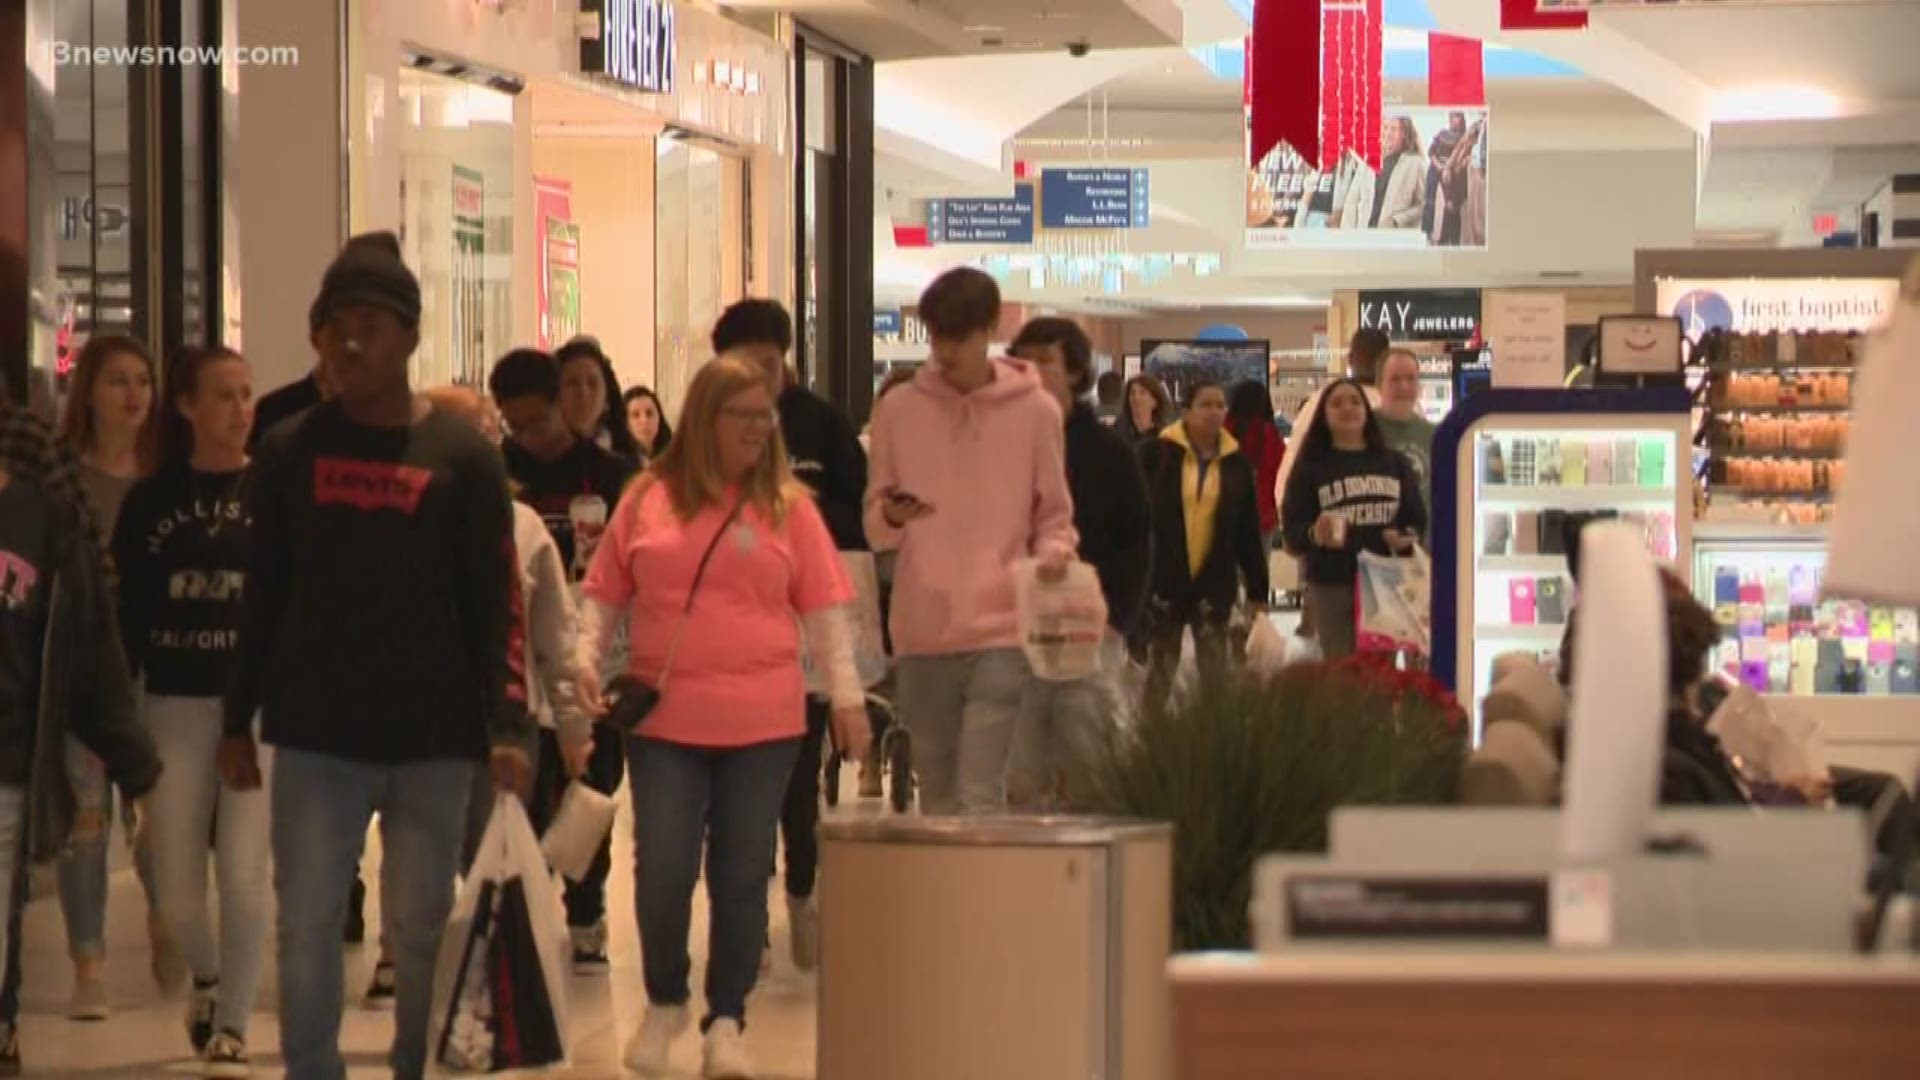 13News Now Meghan Puryear has more on the newest list of stores leaving MacArthur Center including J. Crew, Fossil and Brighton Collectibles.